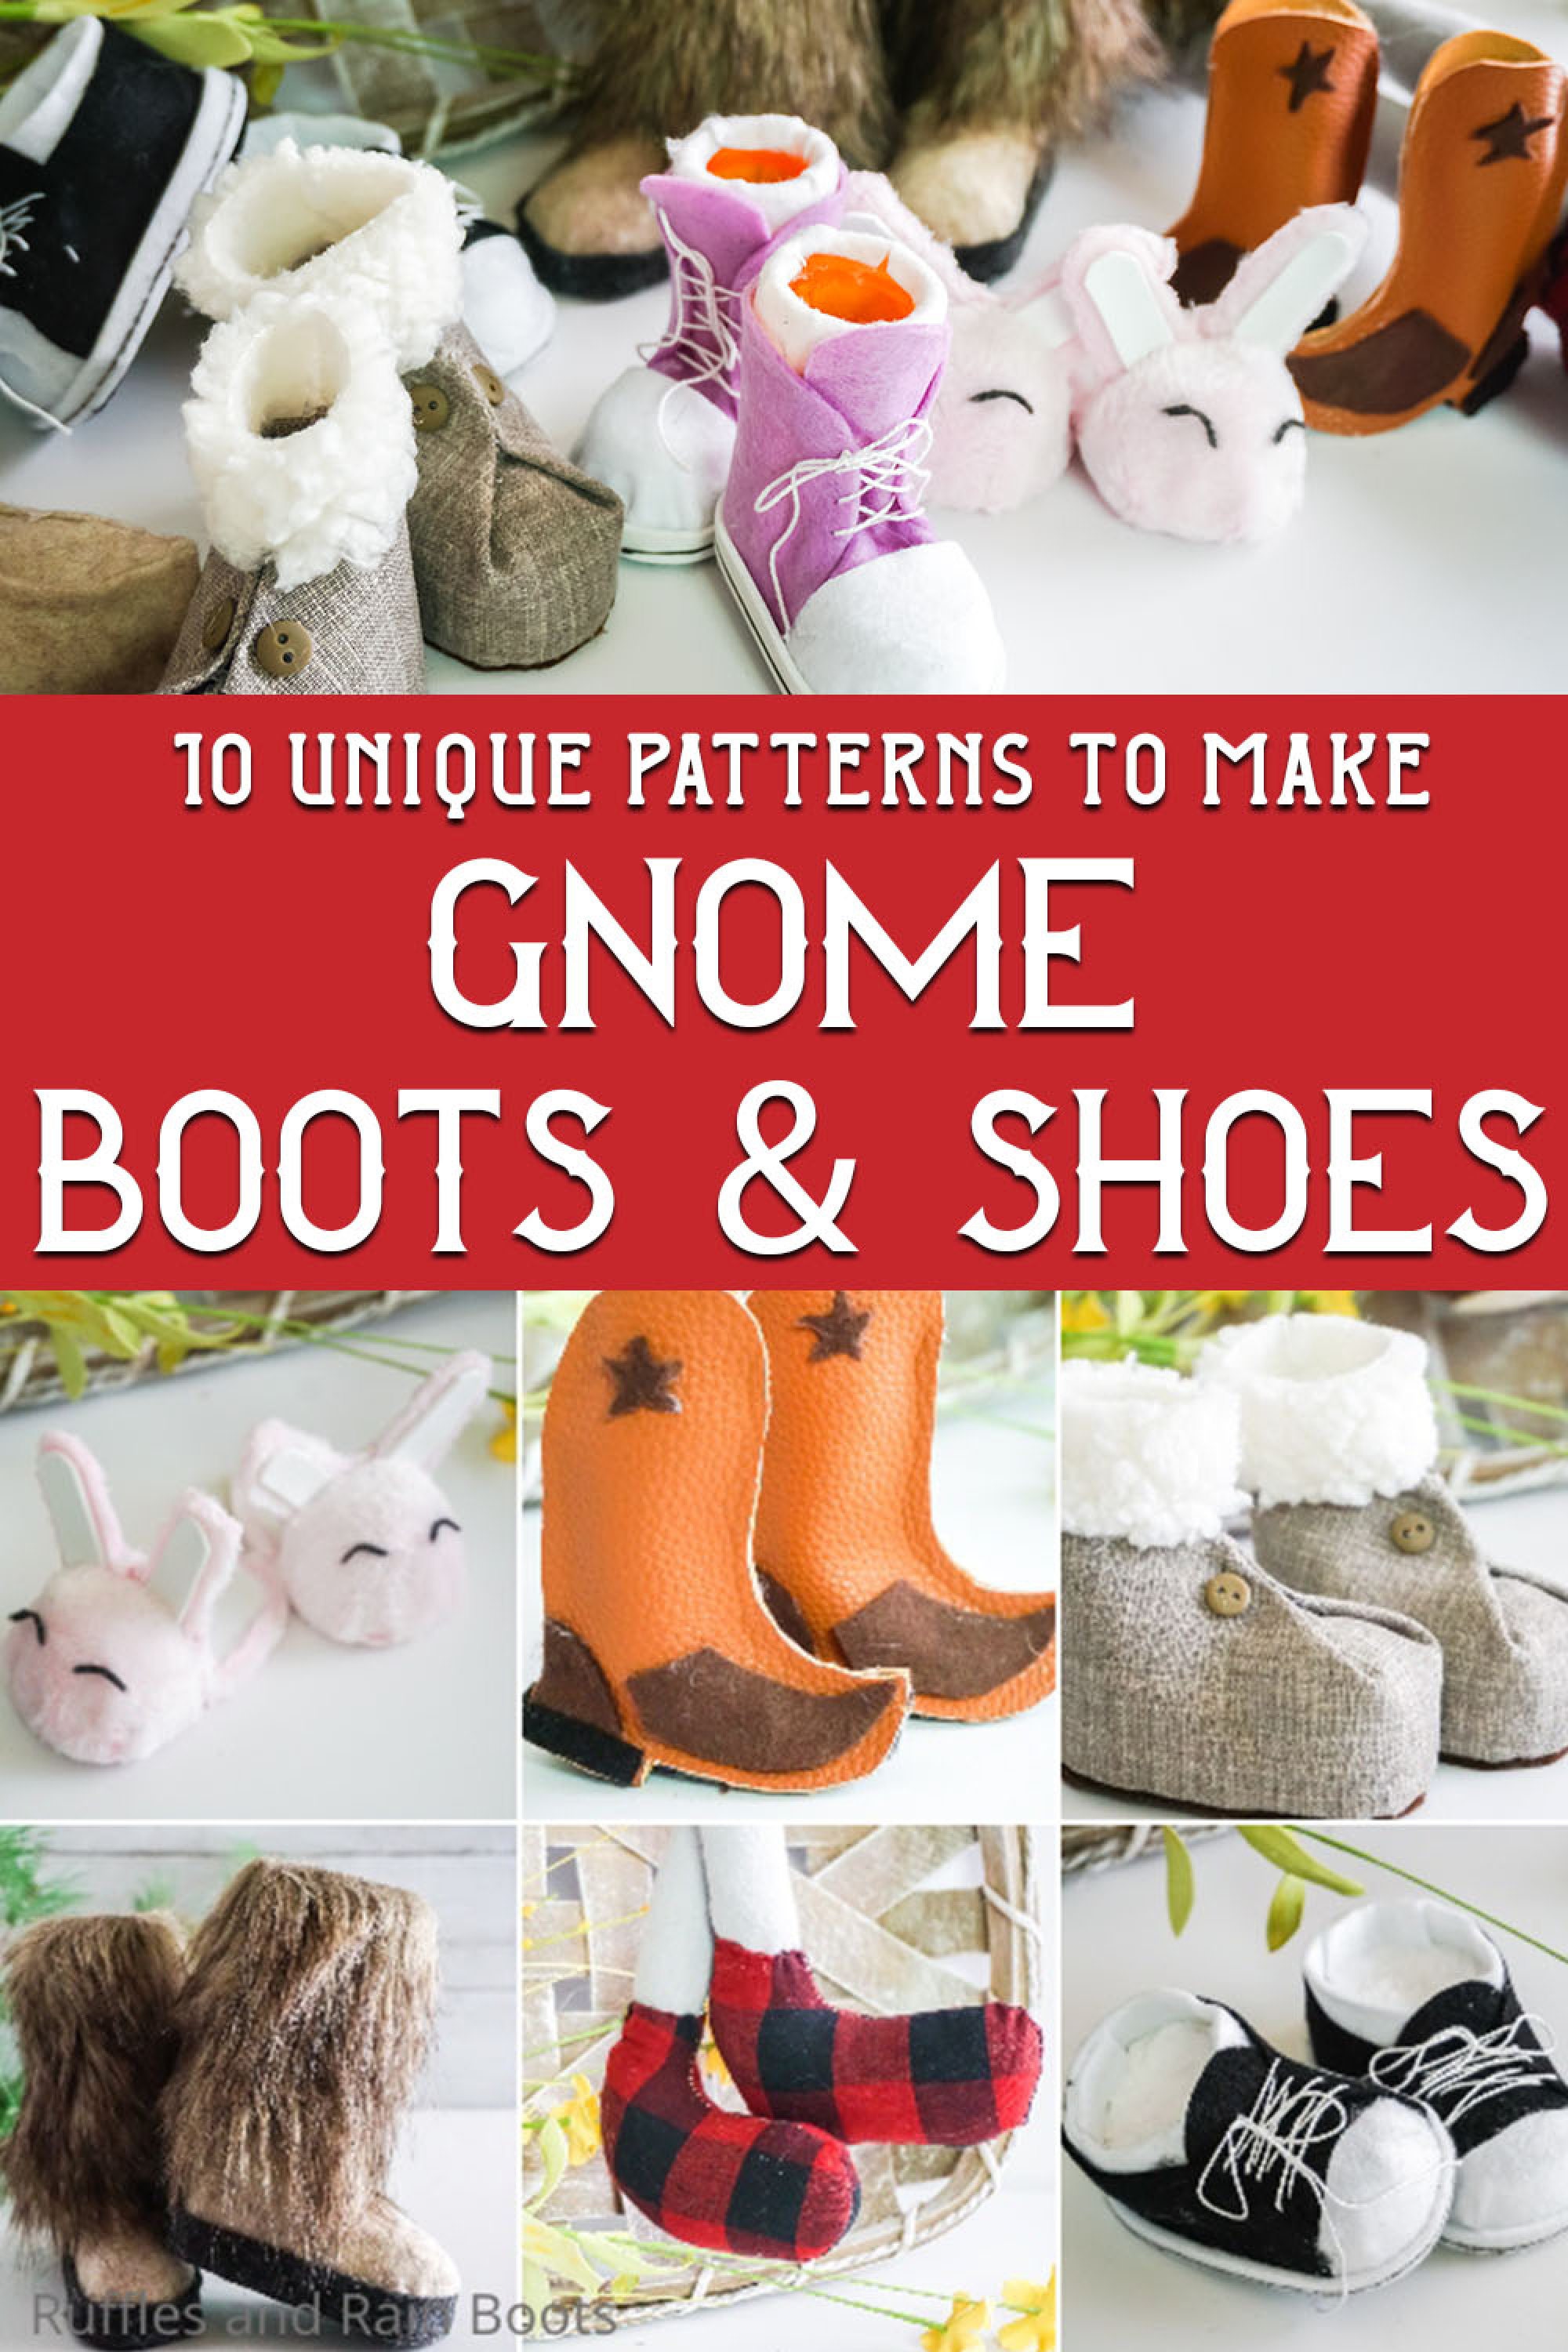 17 Gnome Boot and Shoe Patterns for Every Gnome Maker